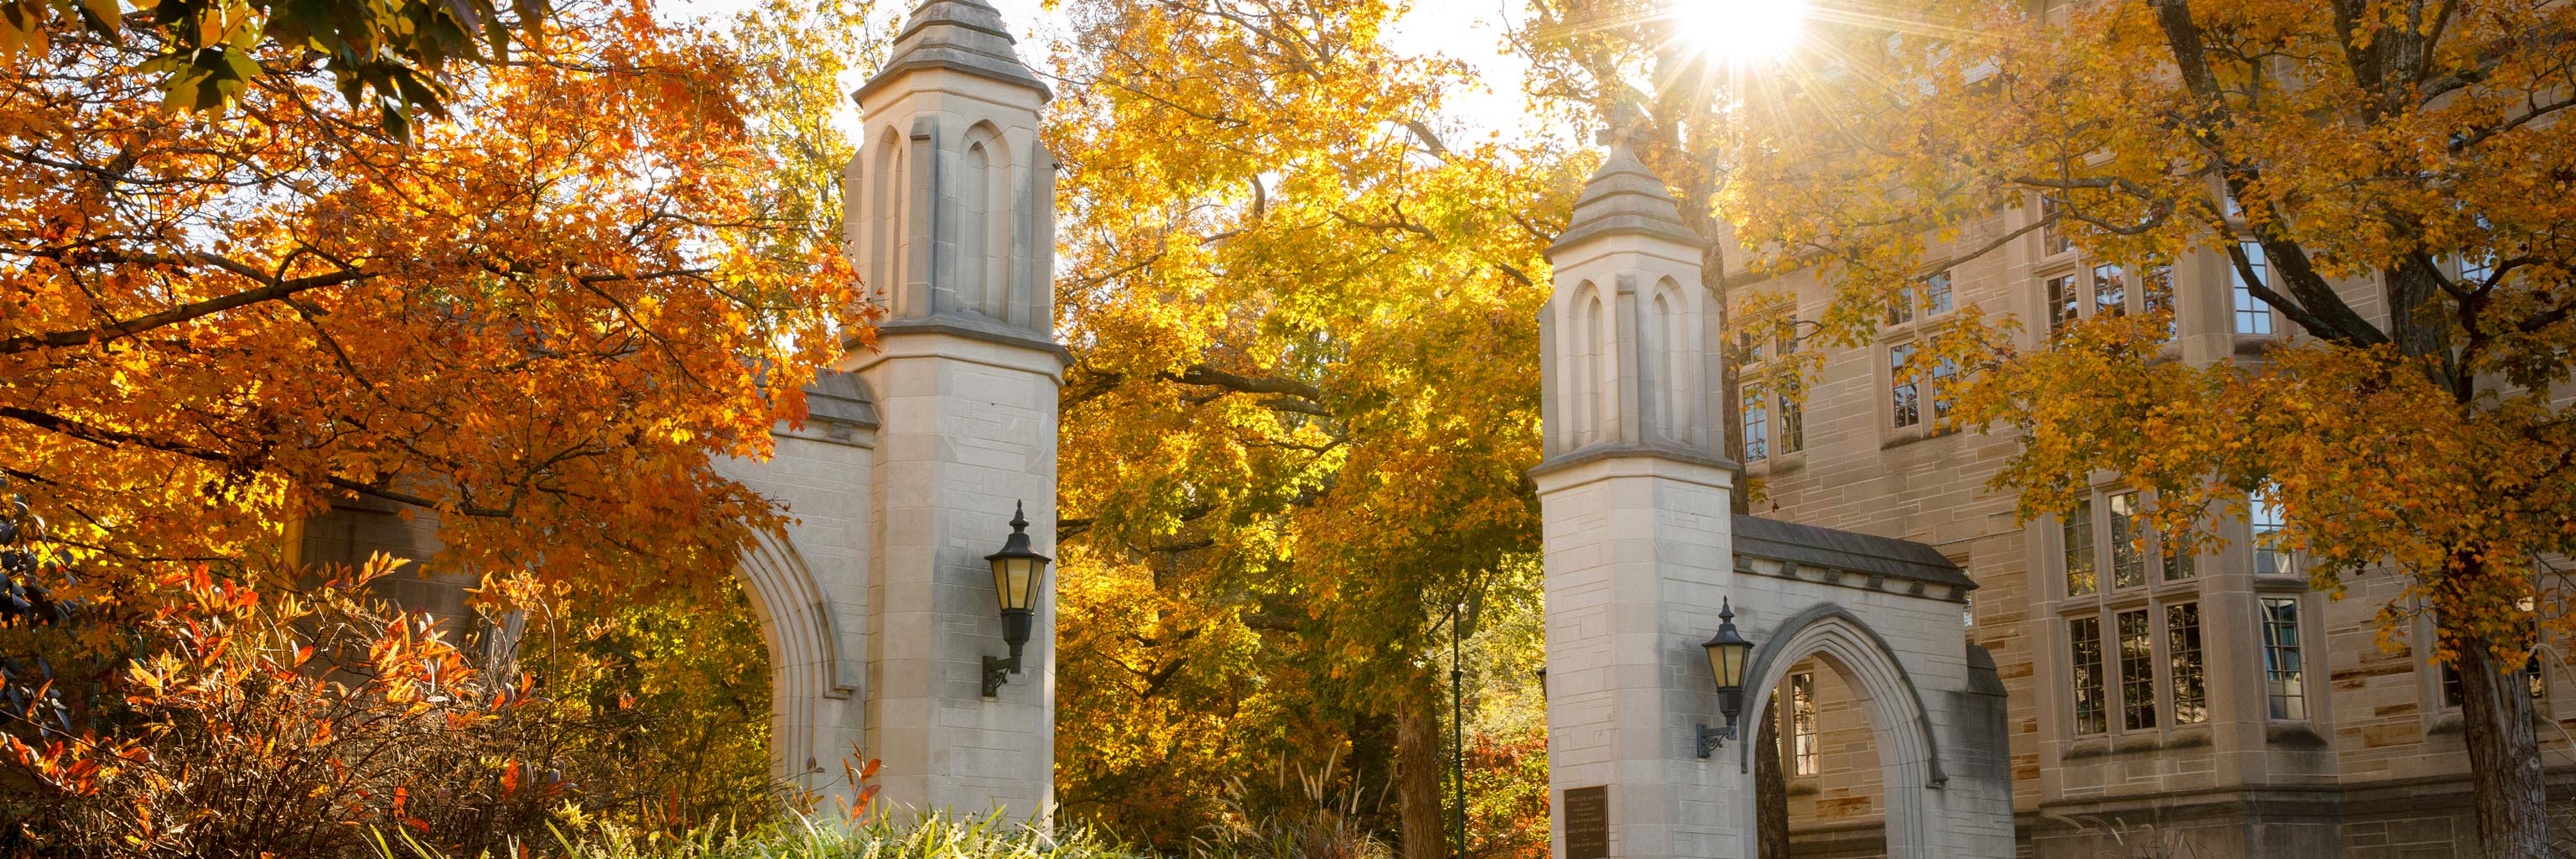 Photo of iconic Sample Gates of IU campus with the sun filtering through colorful fall leaves.